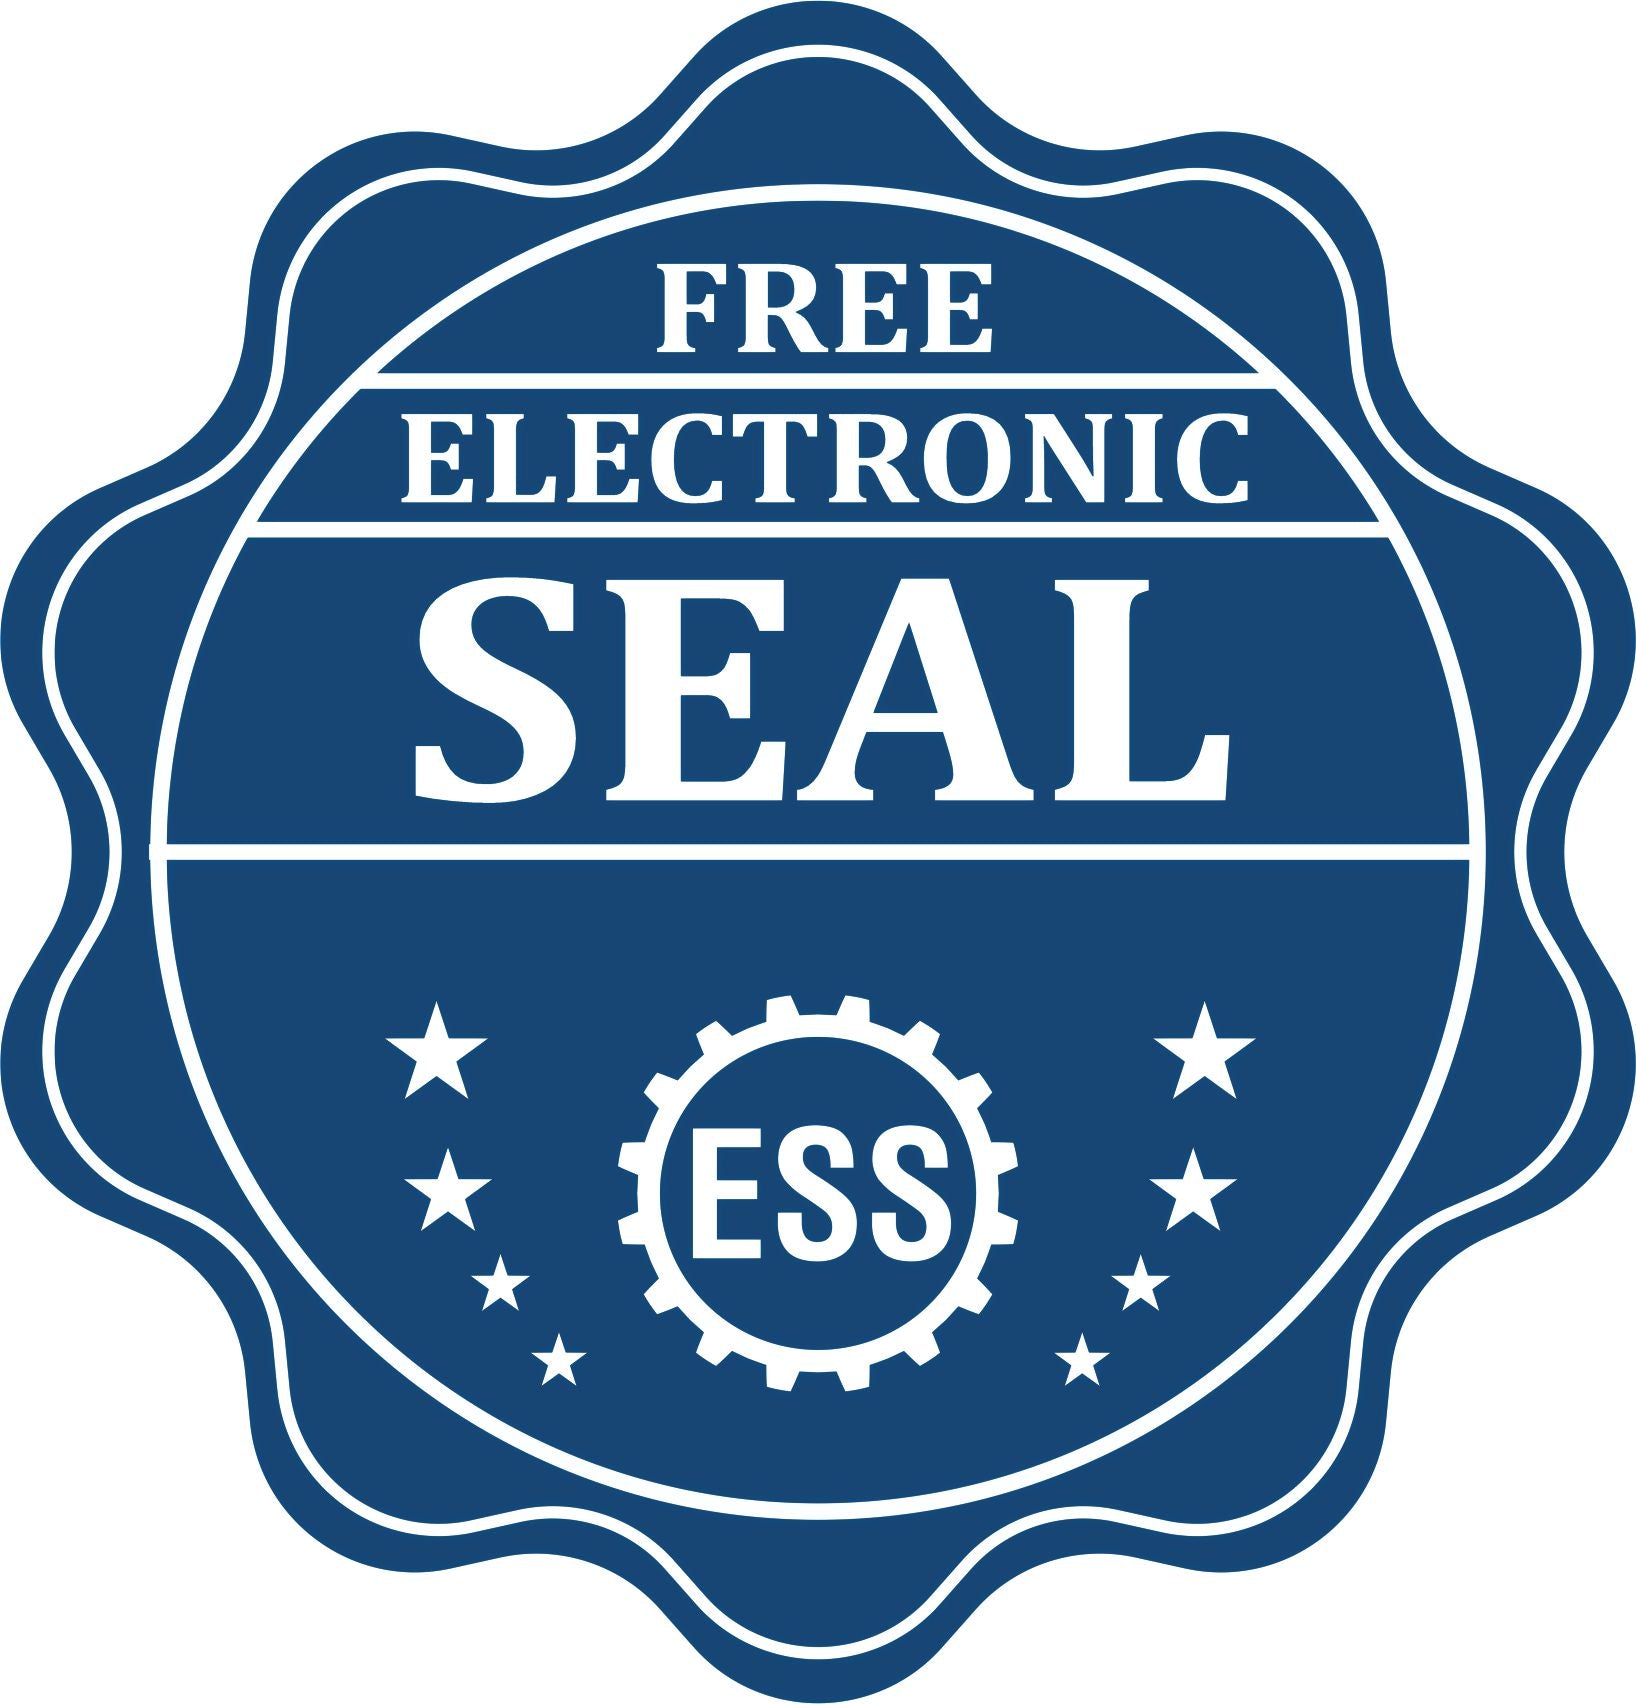 A badge showing a free electronic seal for the New York Desk Surveyor Seal Embosser with stars and the ESS gear on the emblem.